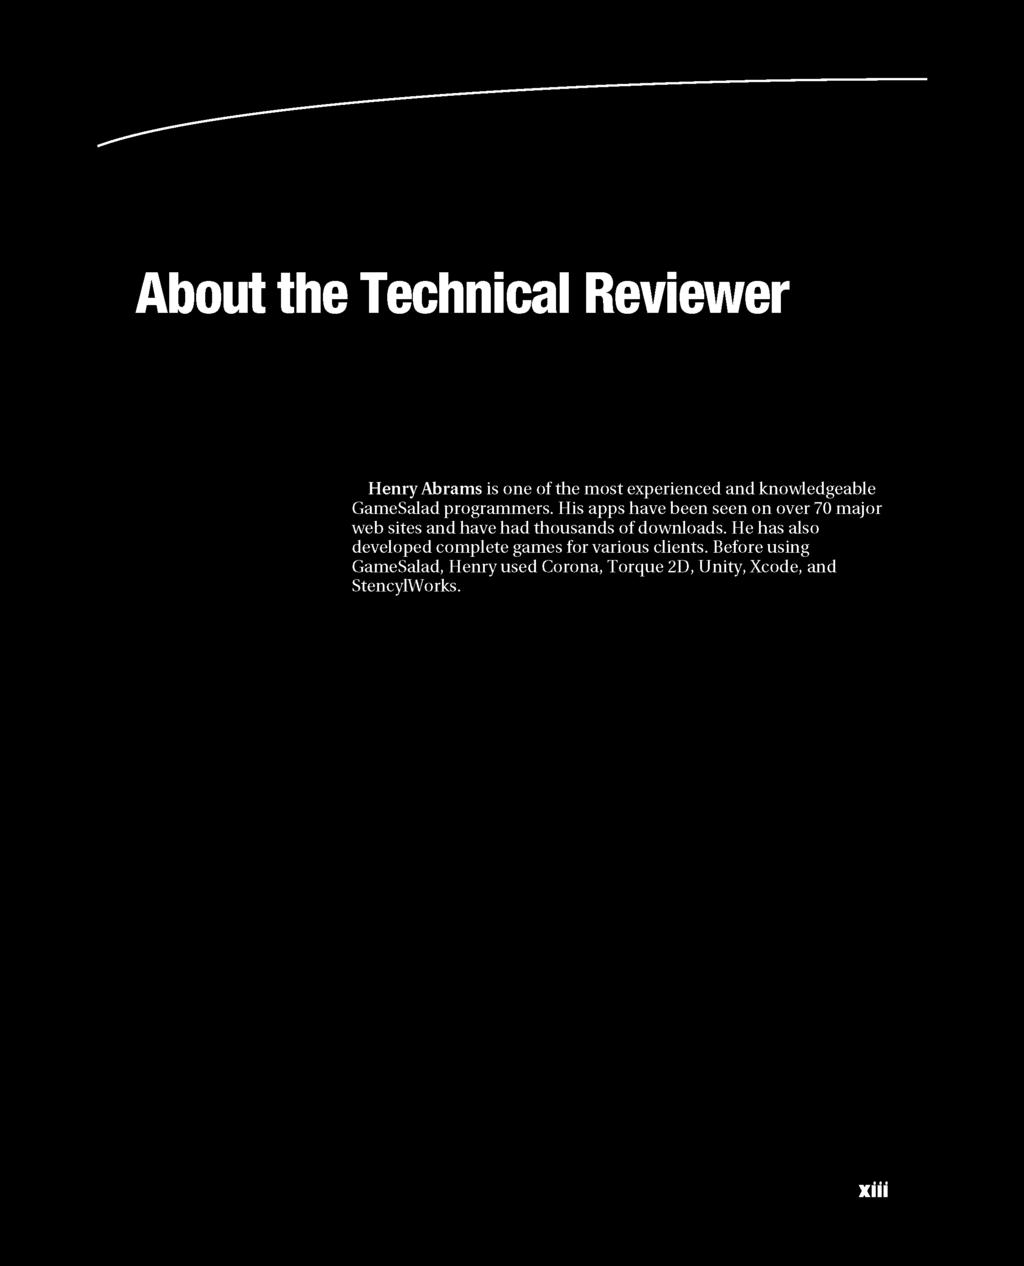 About the Technical Reviewer Henry Abrams is one of the